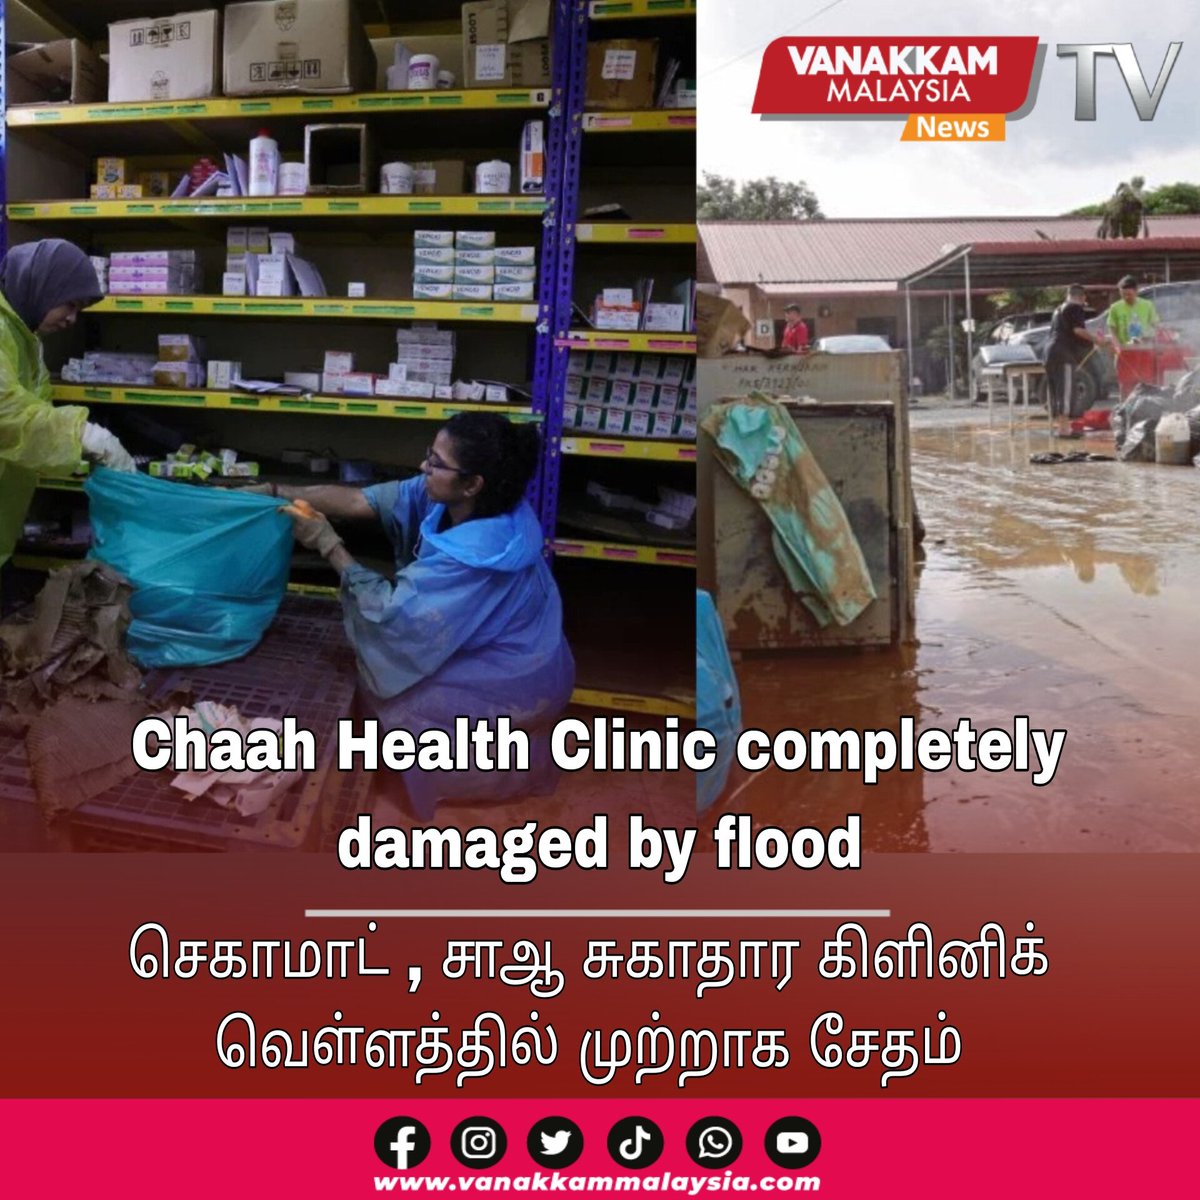 Chaah Health Clinic completely damaged by flood

YouTube Link: youtu.be/dMSGz5cD6V0

#latest #vanakkammalaysia #chaah #healthclinic #completely #damaged #flood #trendingnewsmalaysia #malaysiatamilnews #fyp #vmnews #foryoupage